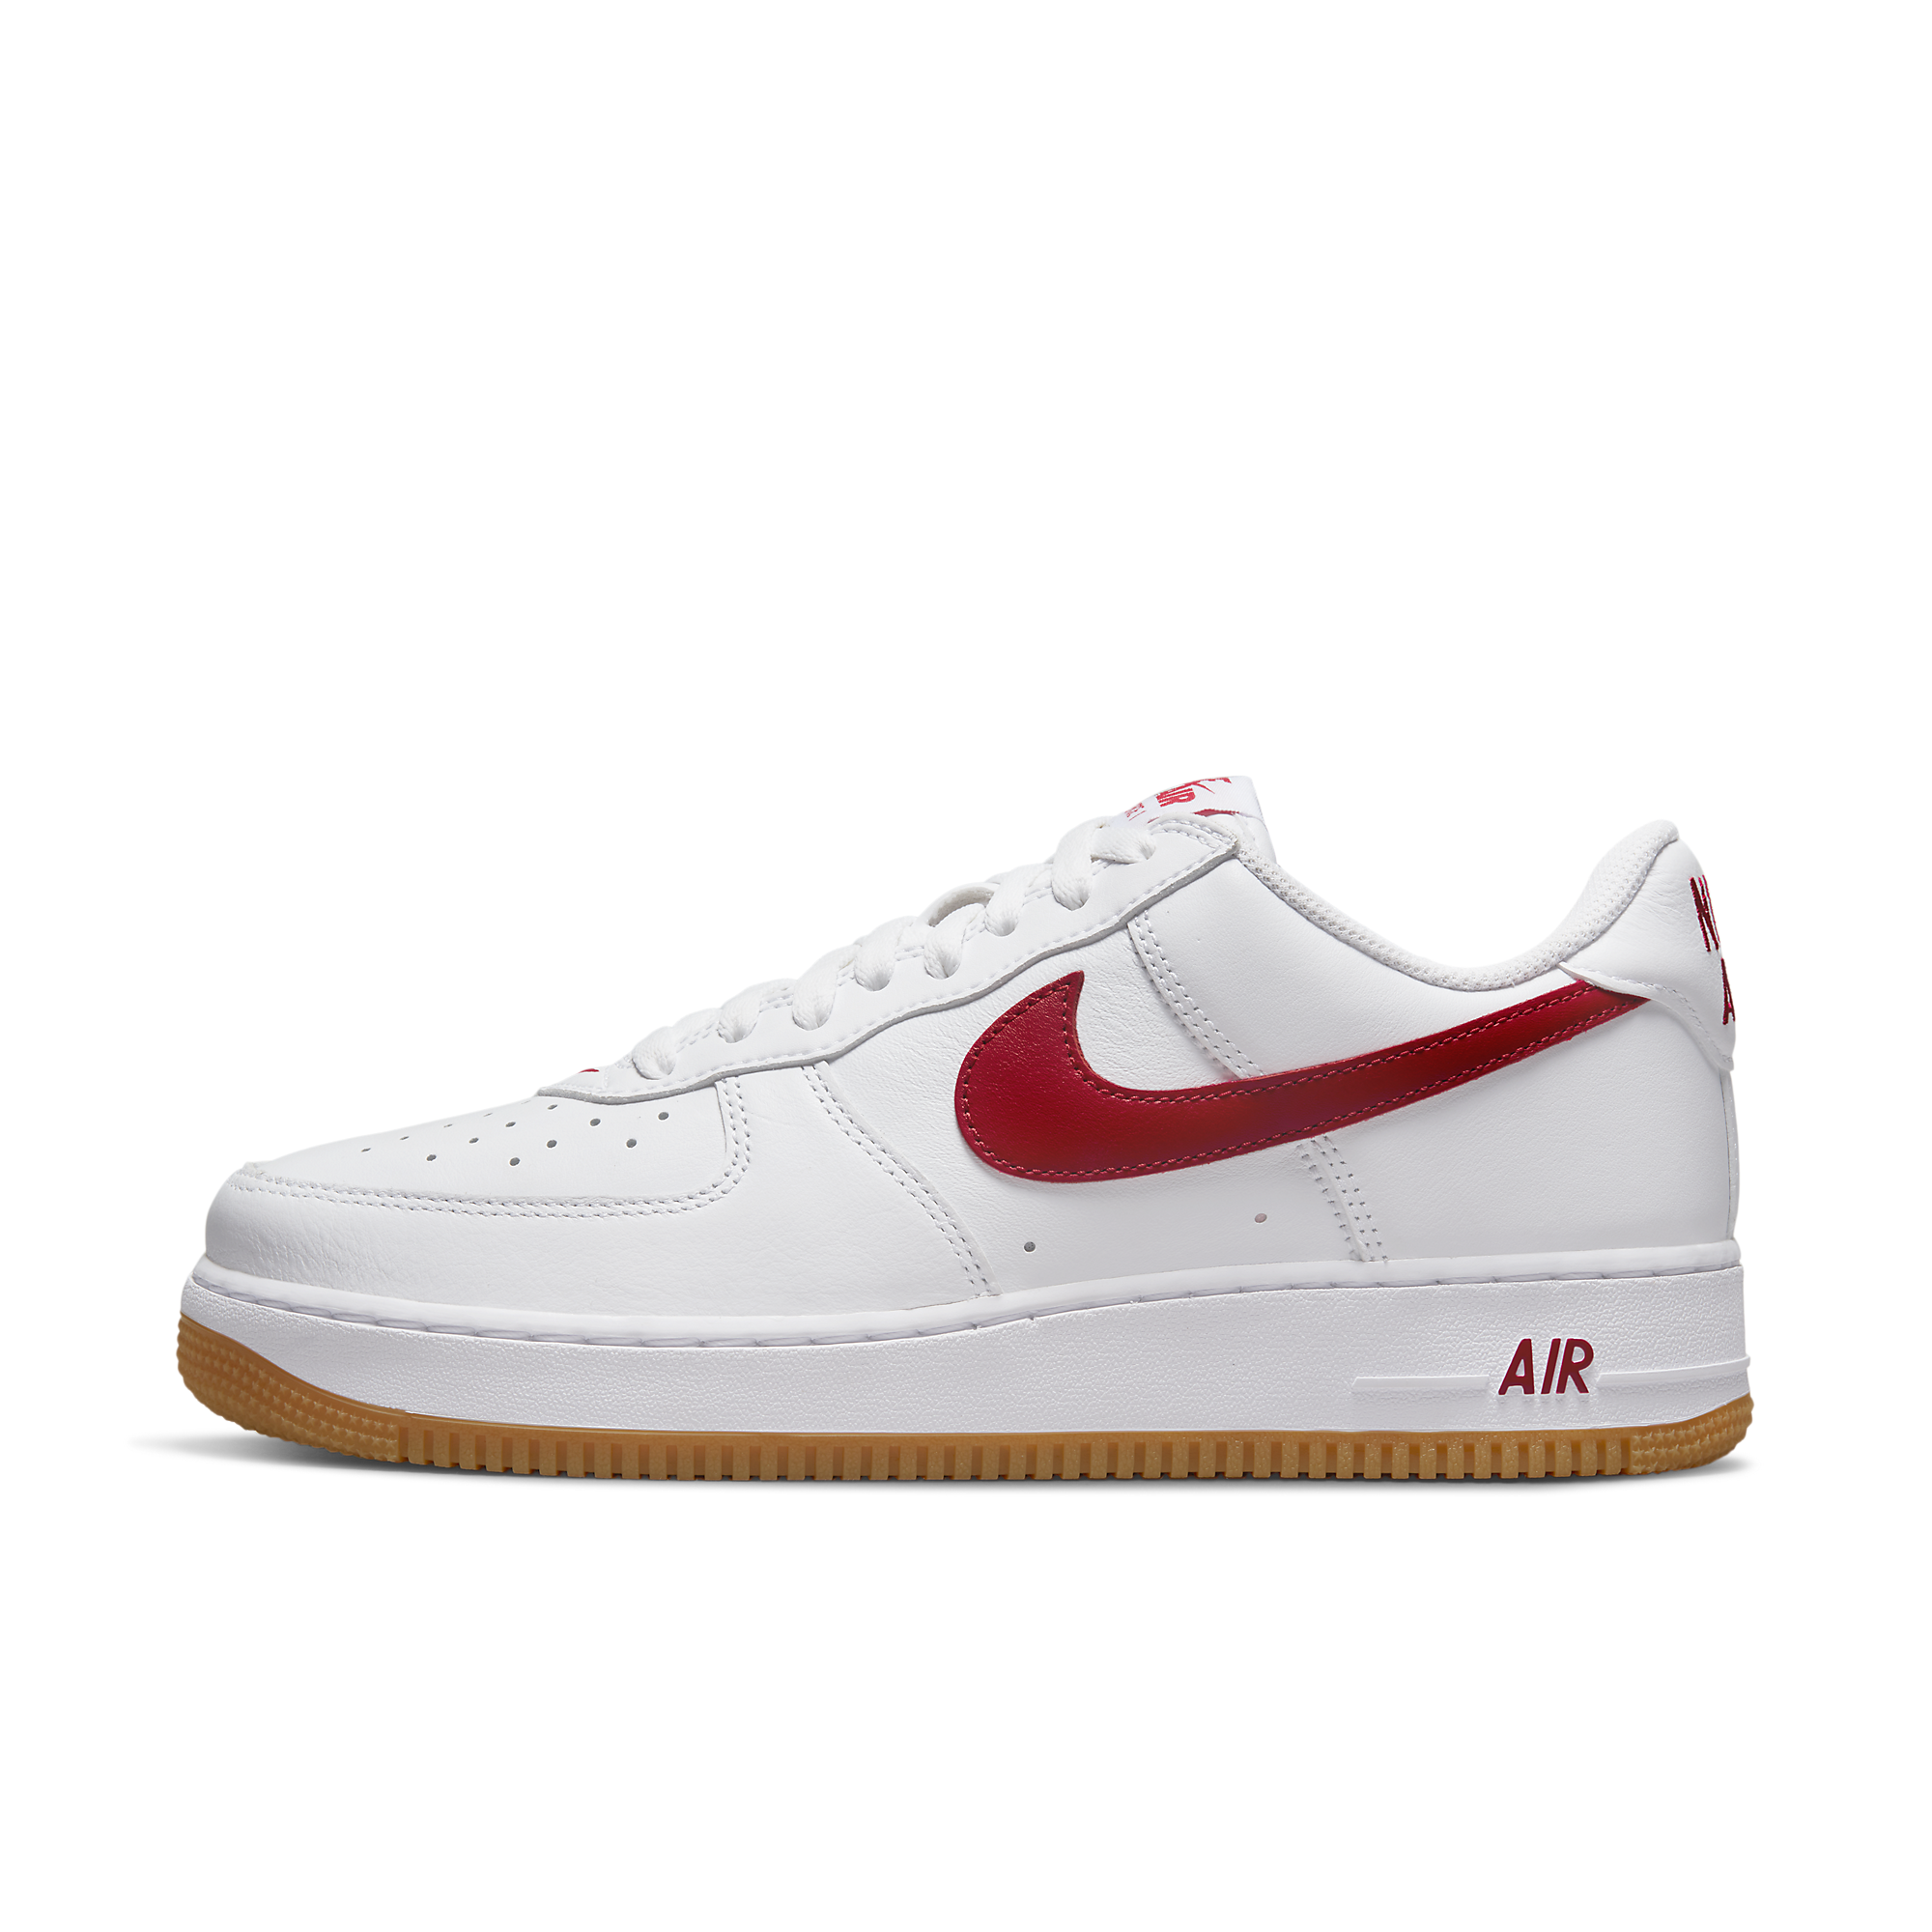 Air Force 1 Low Retro "Color of the Month"